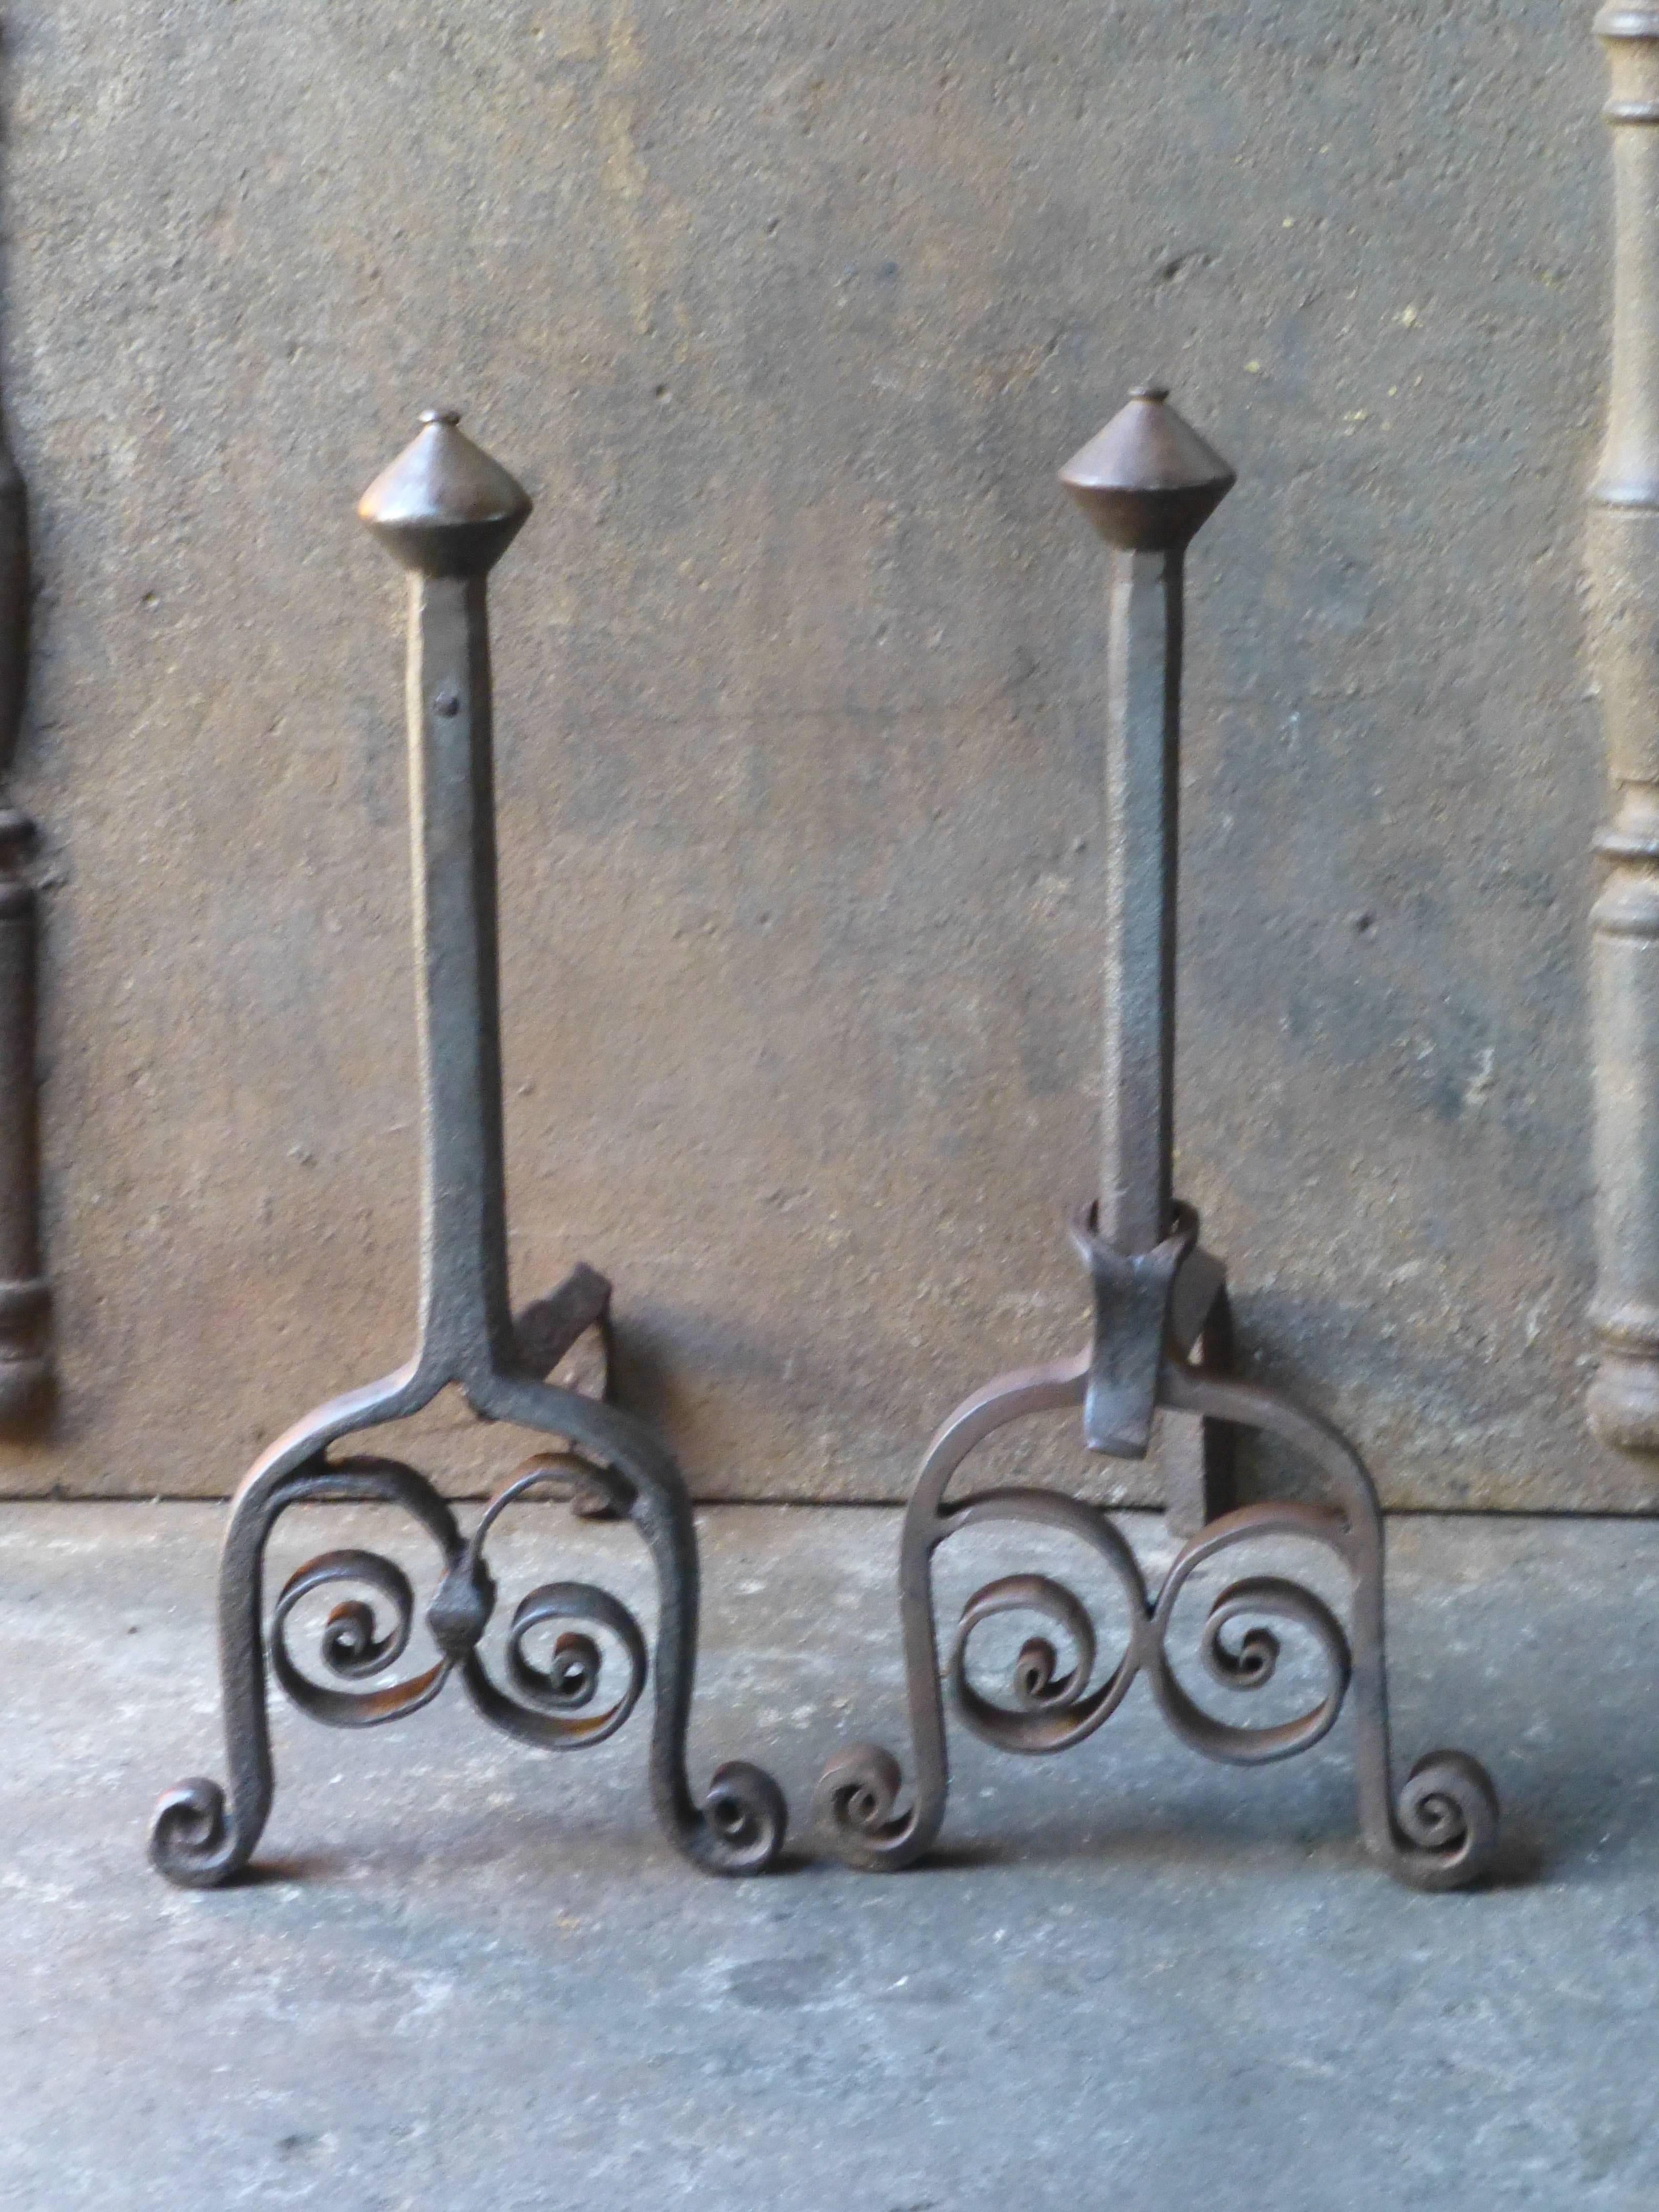 18th century French andirons or fire dogs made of wrought iron.